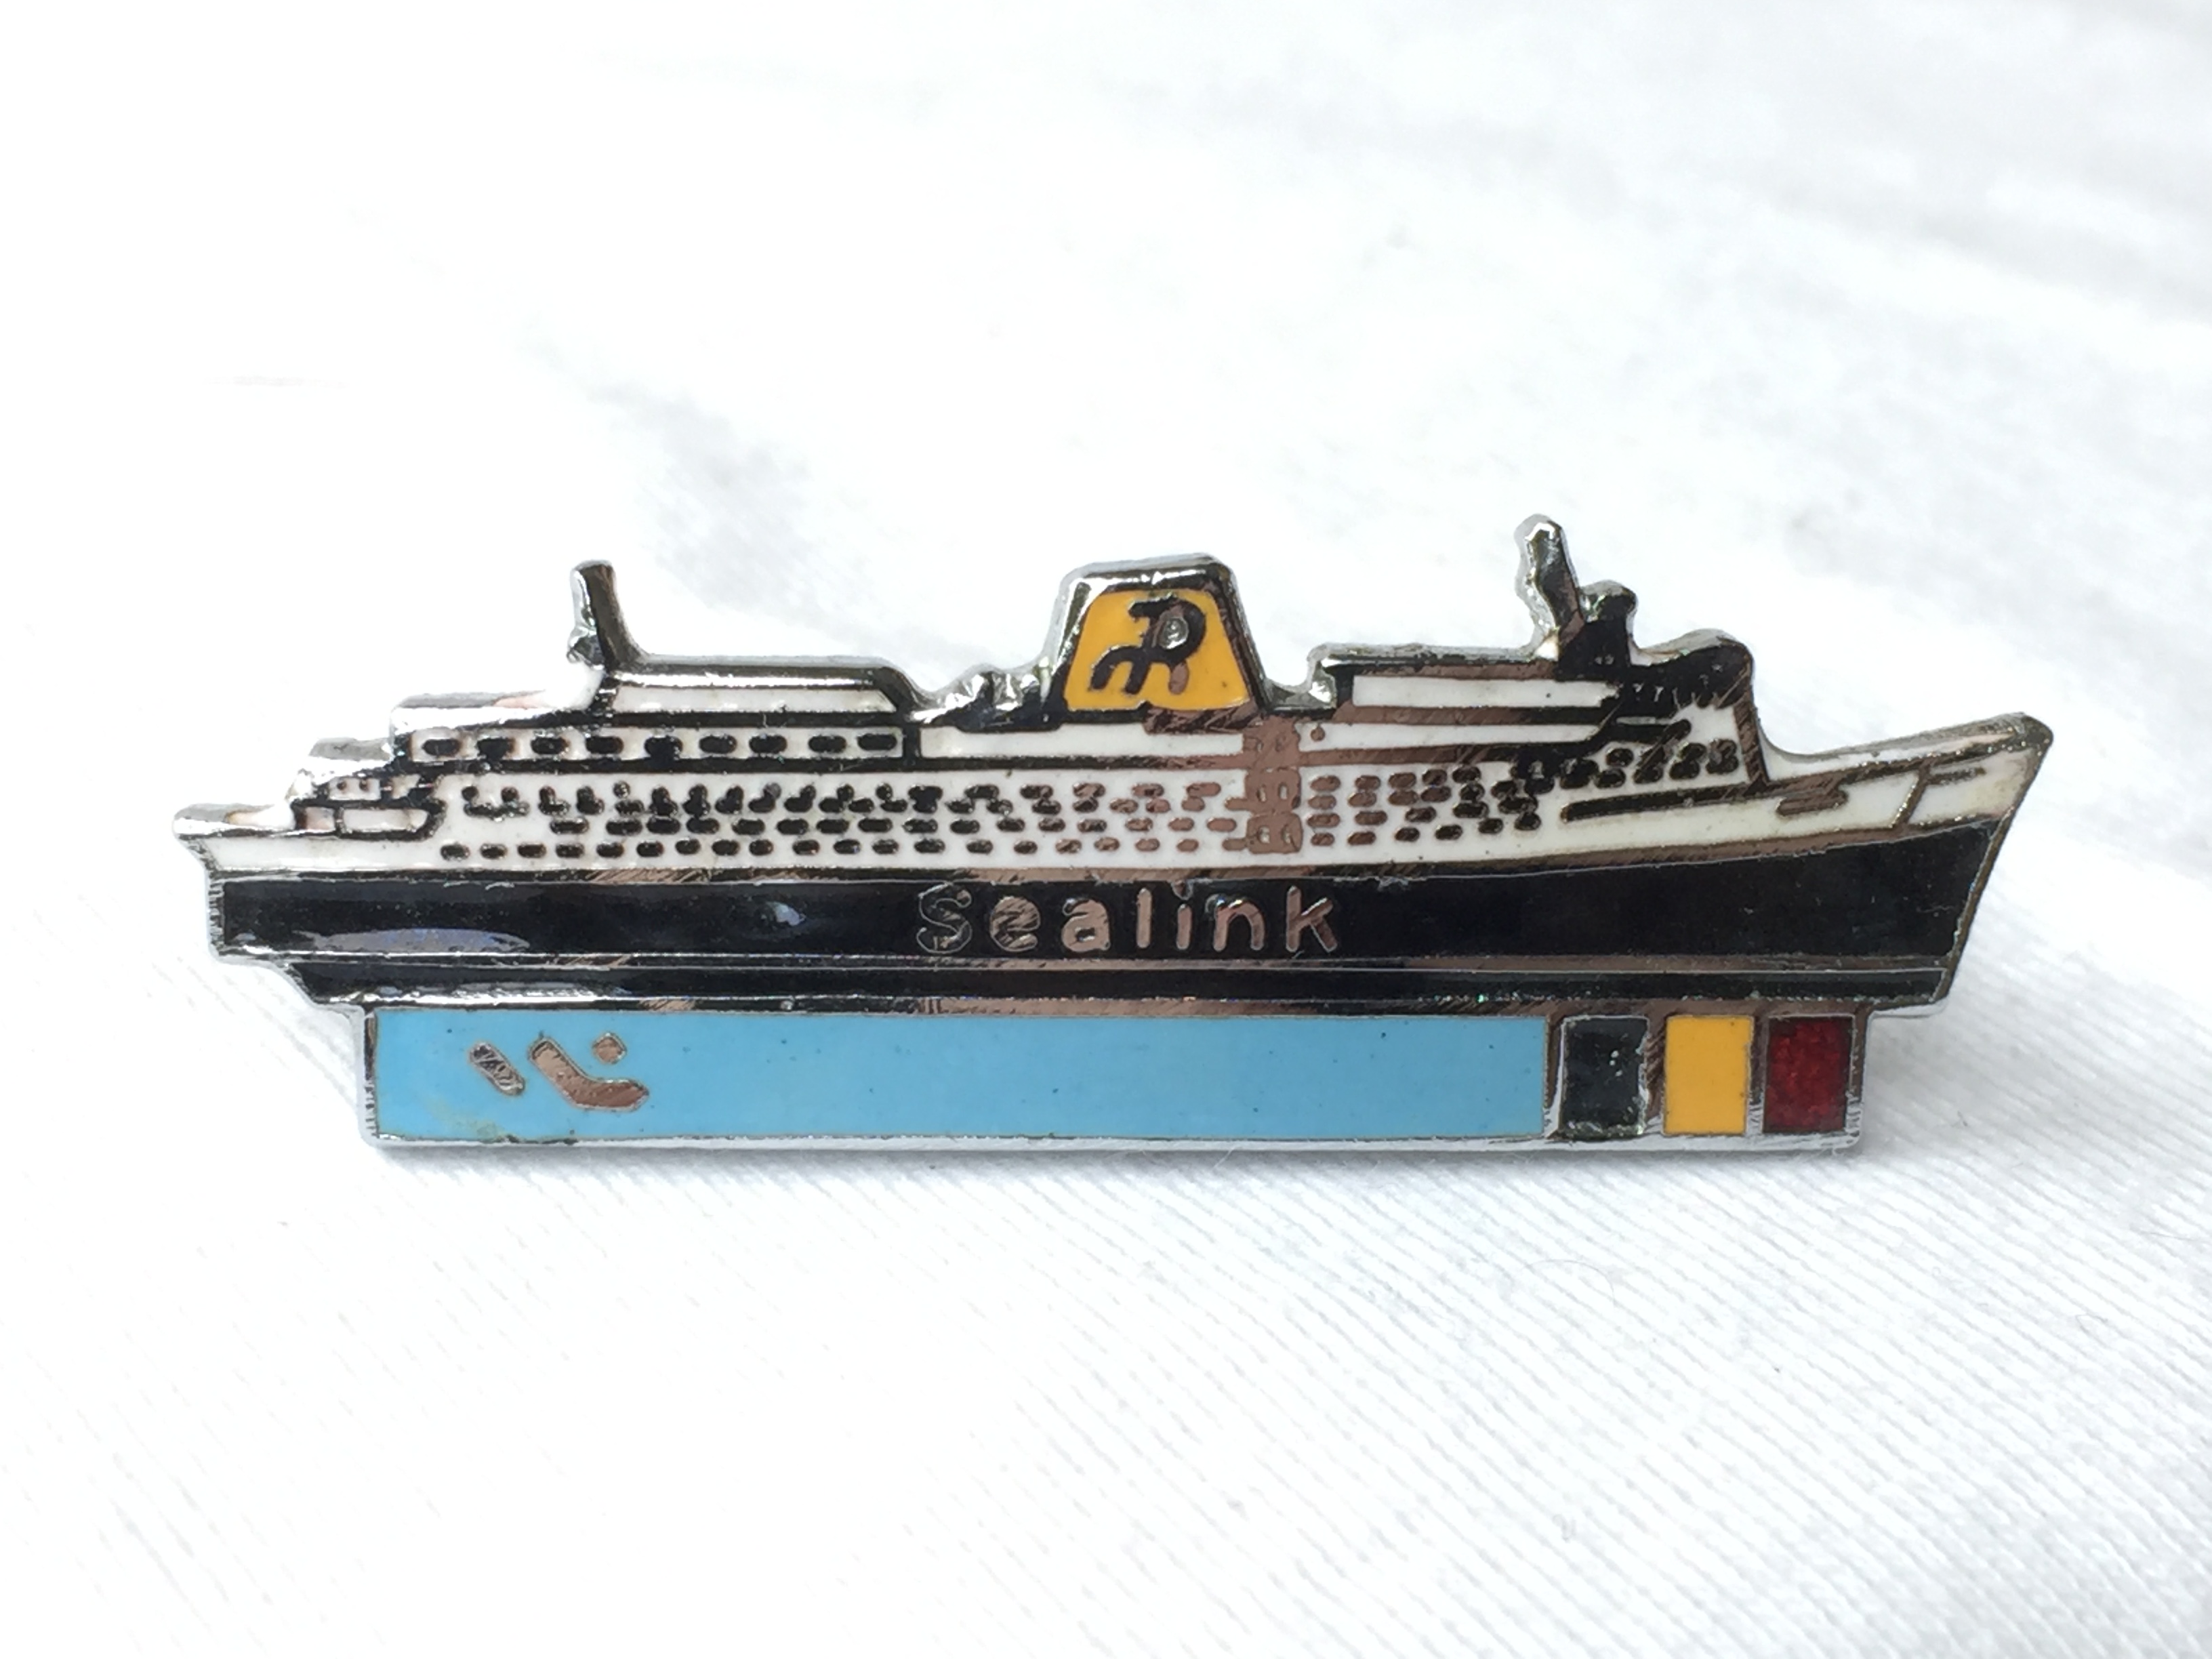 SHIP SHAPE LAPEL PIN FROM THE SEALINK FERRY CROSSING SERVICE